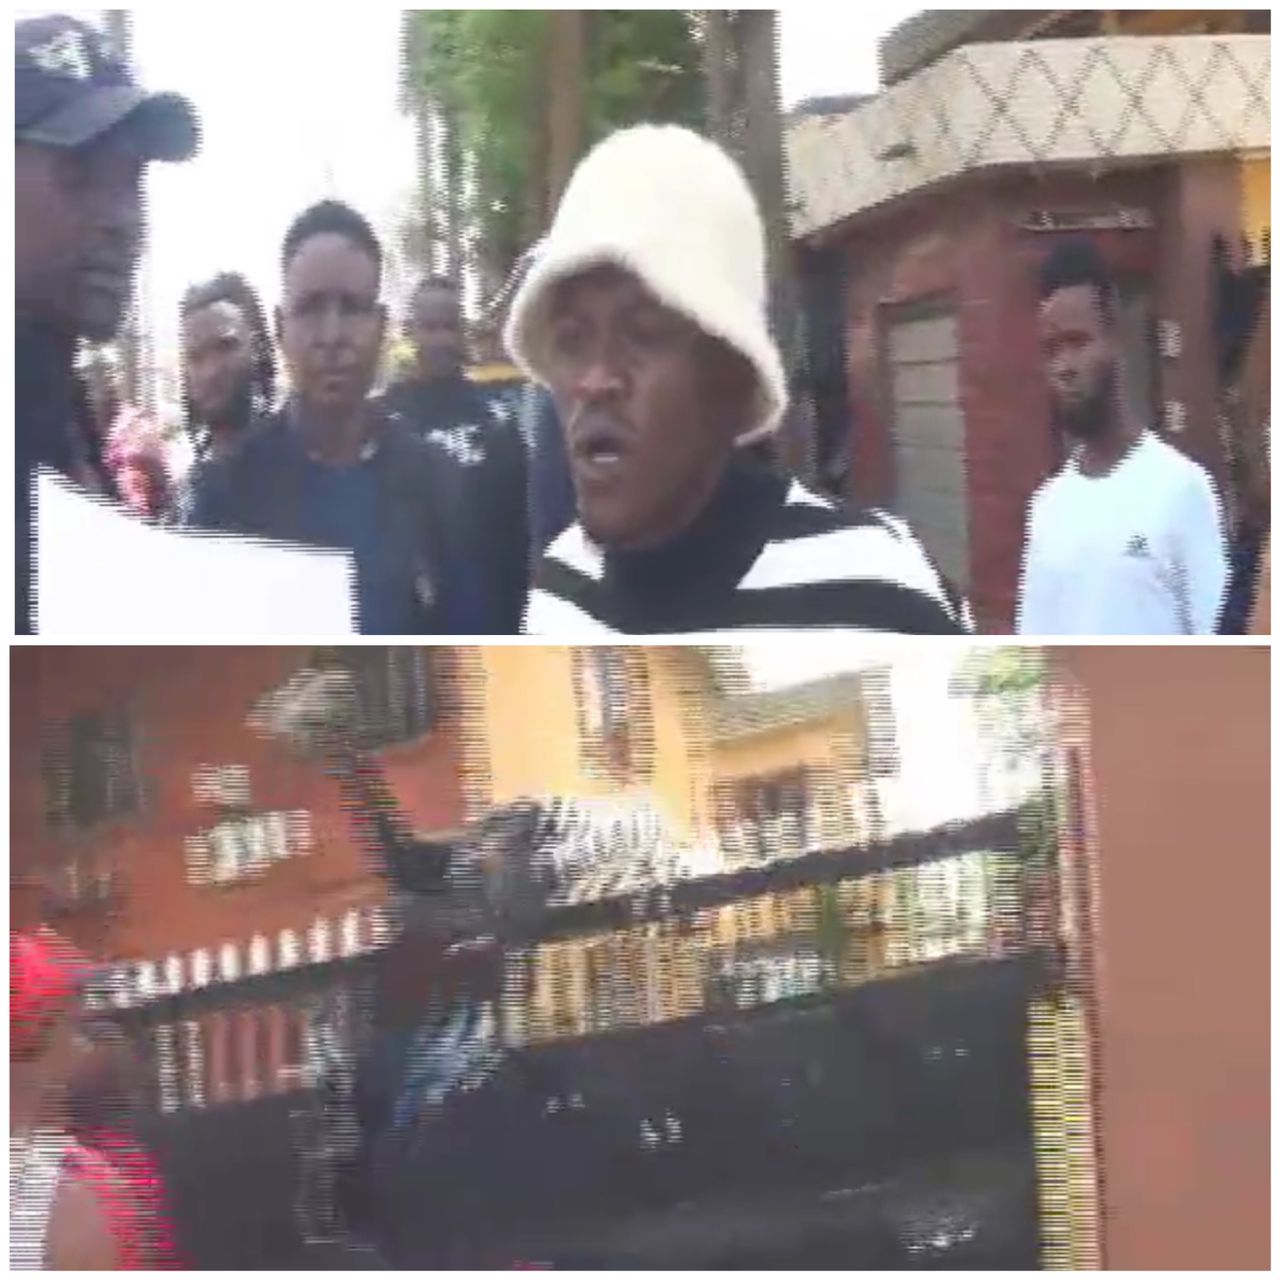 Singer Portable jumps gate to escape as police come to arrest him over alleged unpaid debt for his G-Wagon (video)